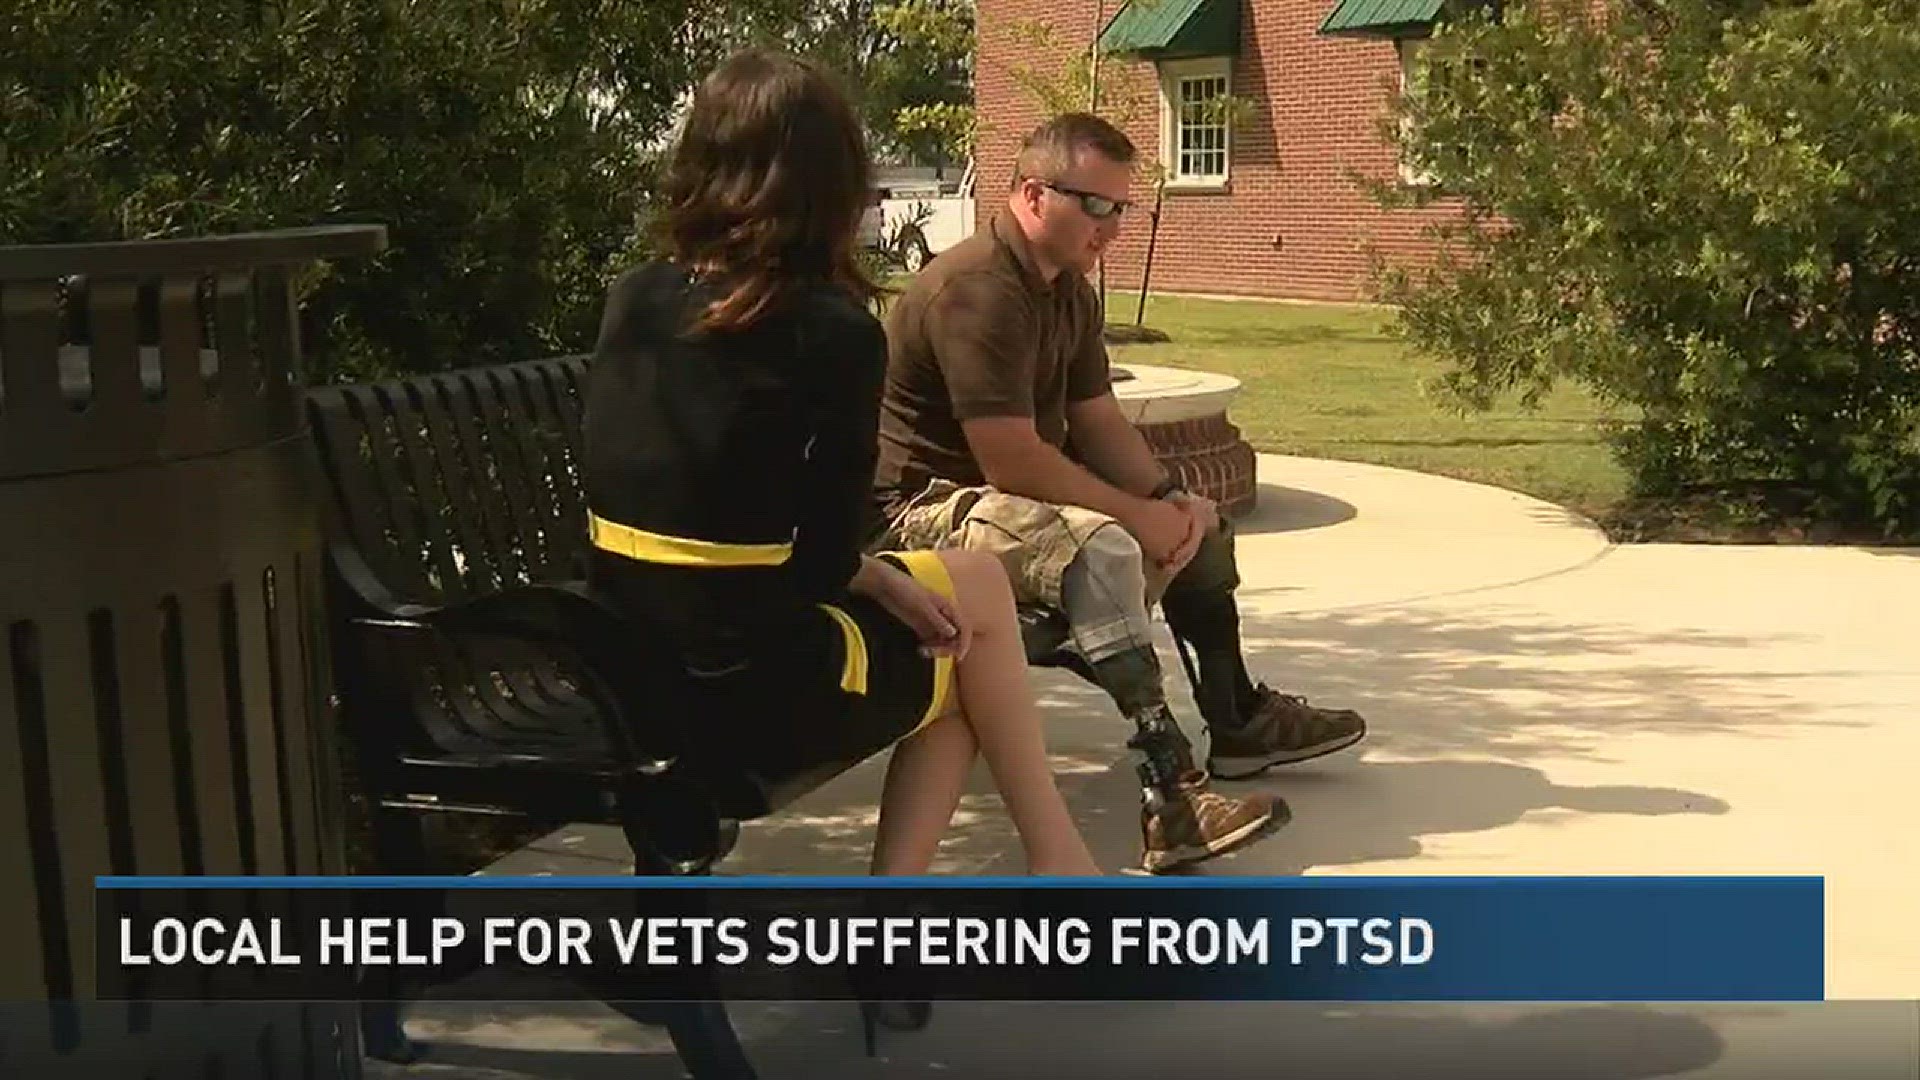 Local help for vets suffering from PTSD